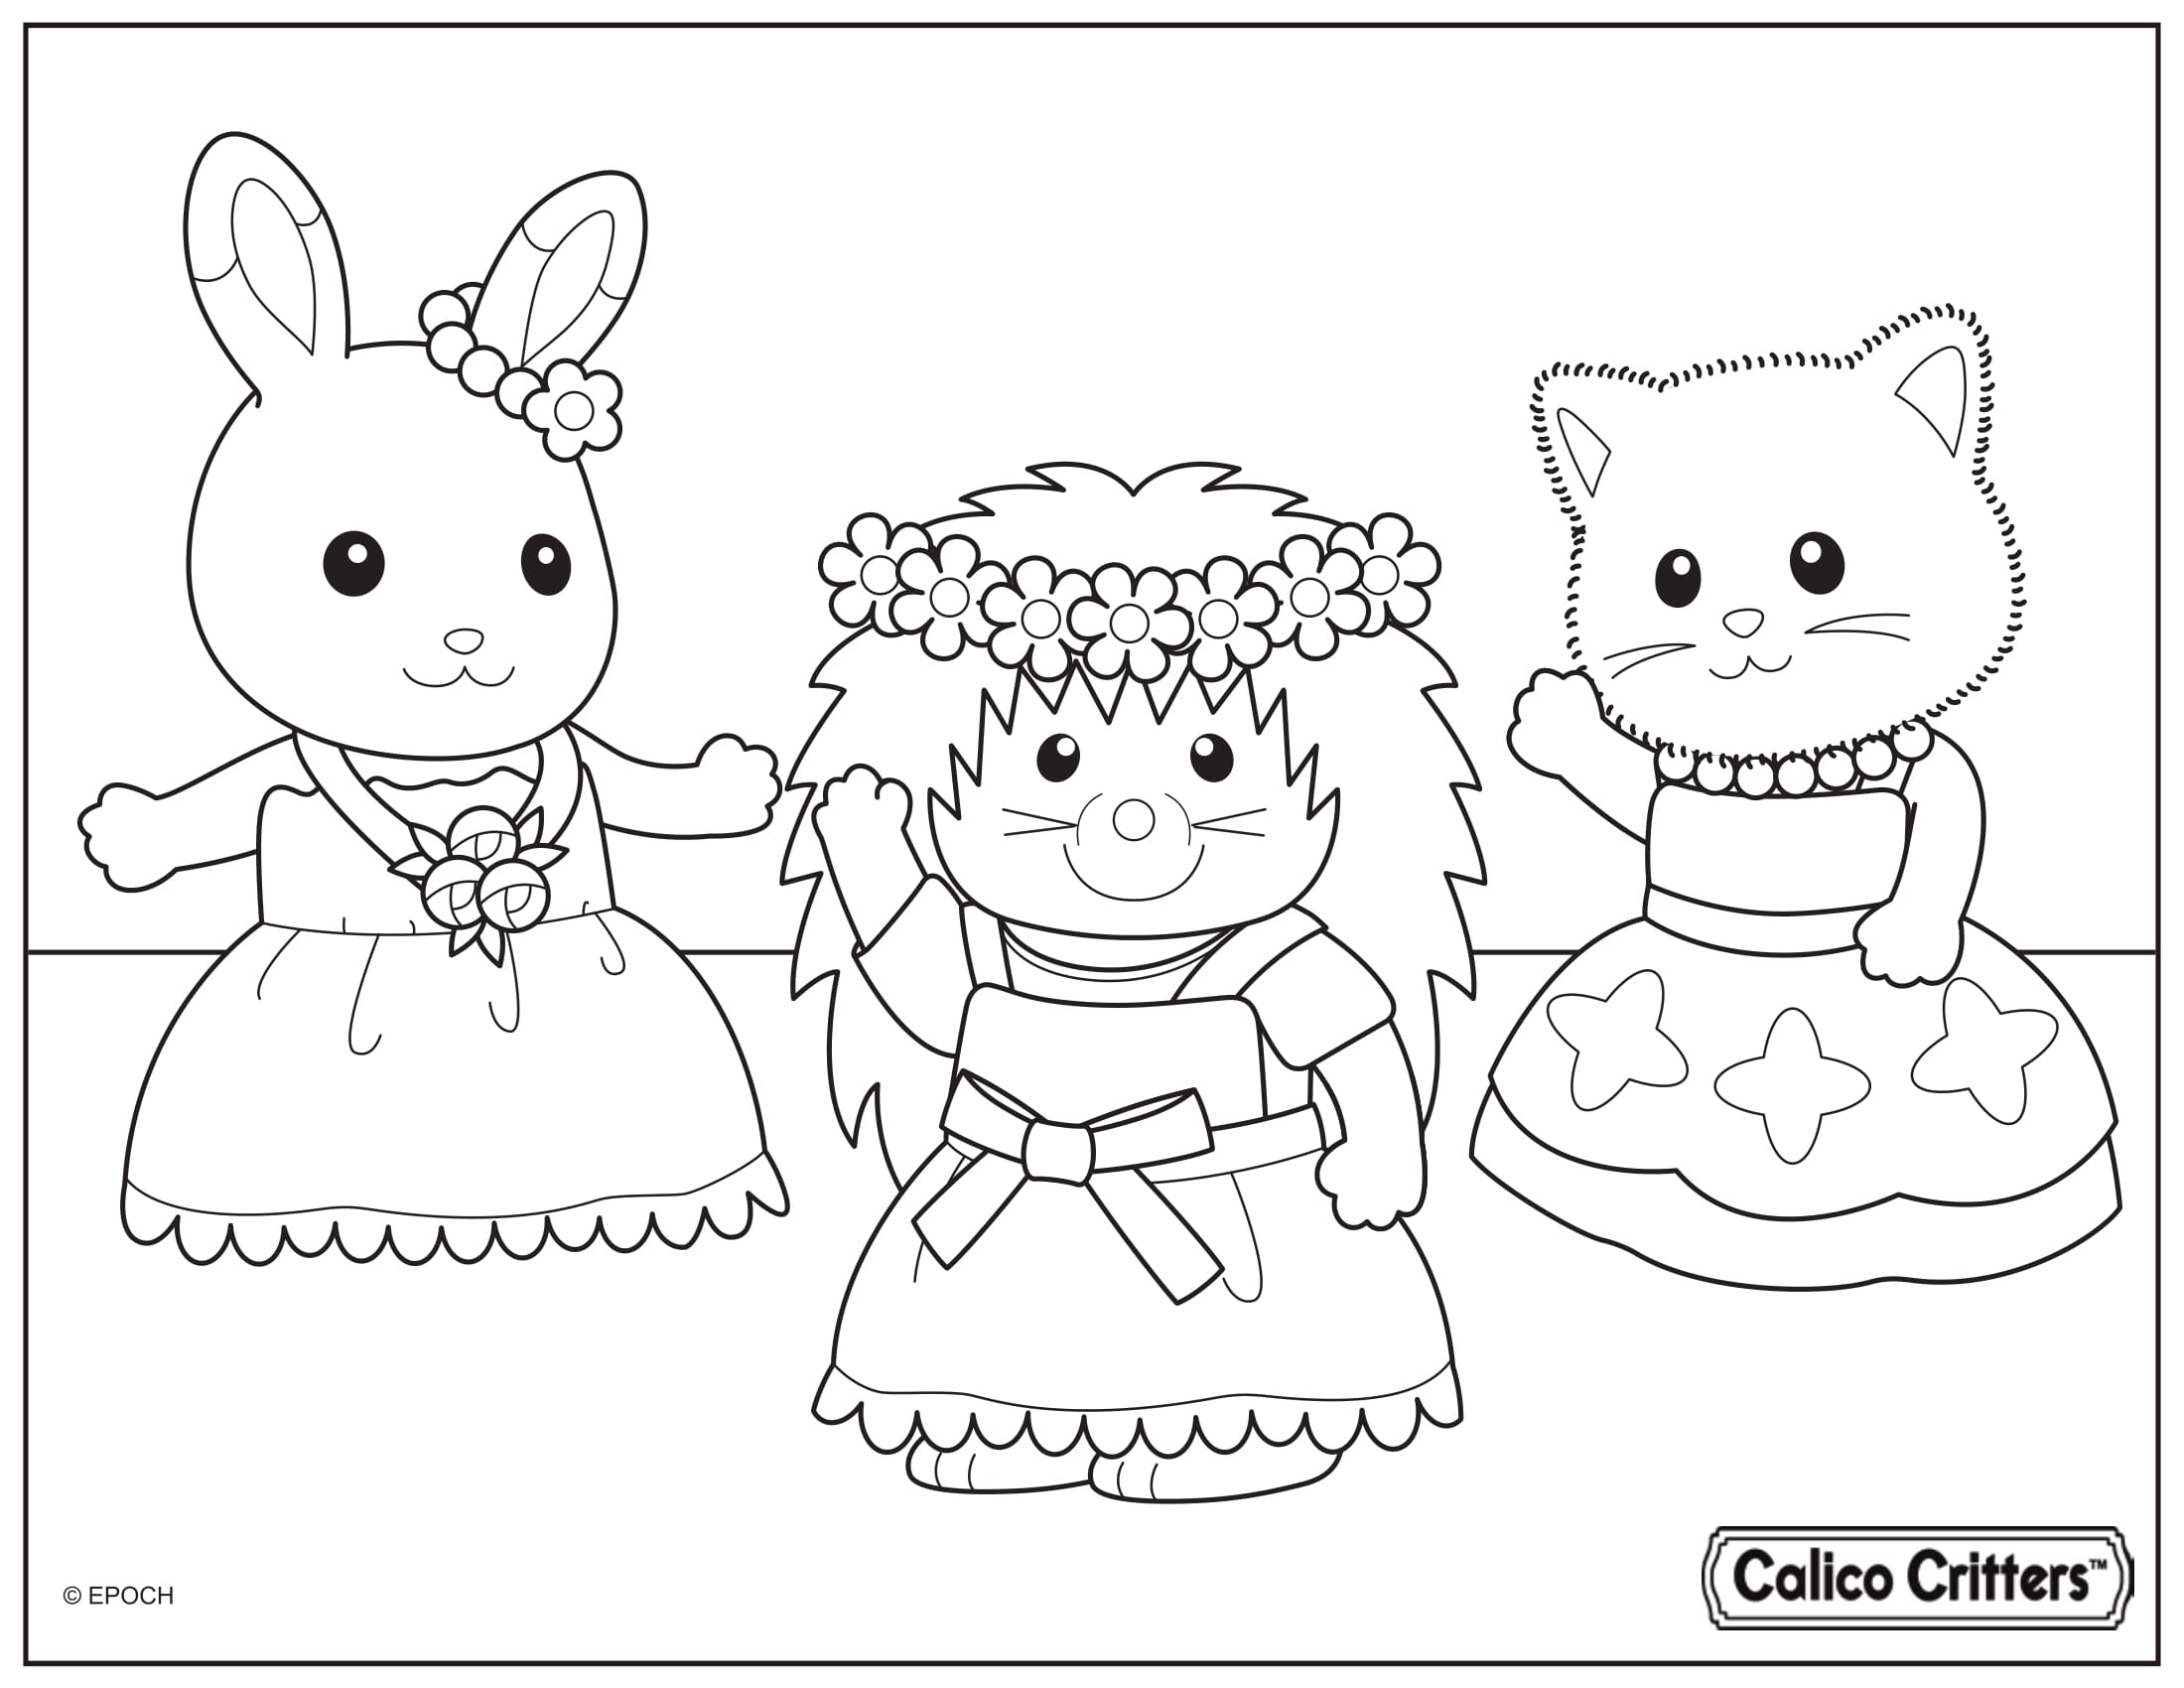 Calico Critters Dance Party Time